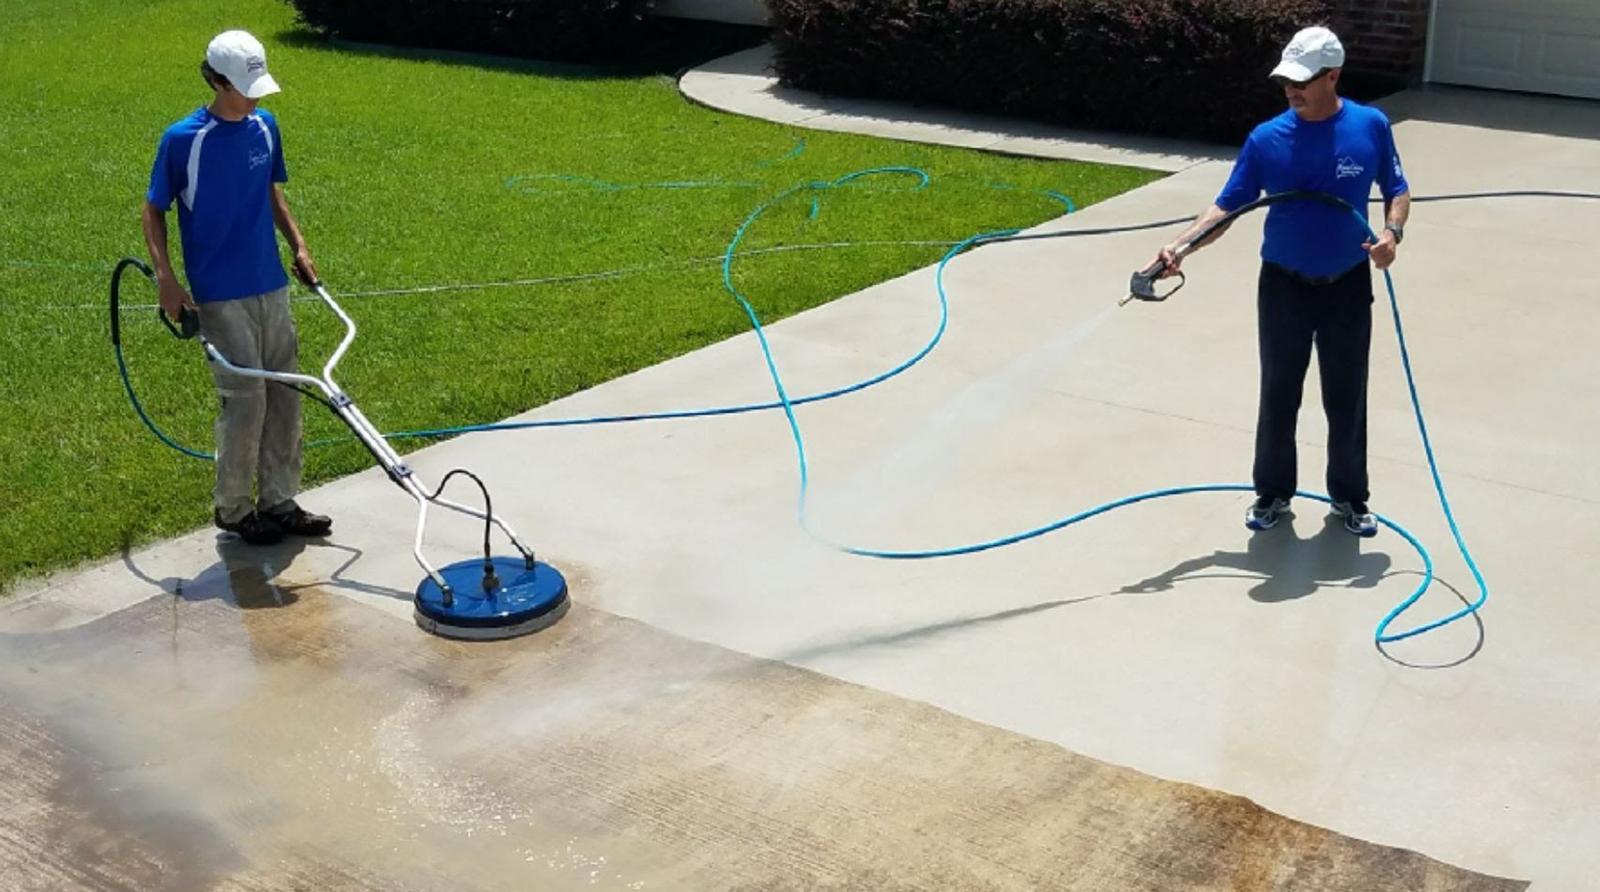 4 EFFECTIVE TIPS TO KEEP YOUR DRIVEWAY CLEAN